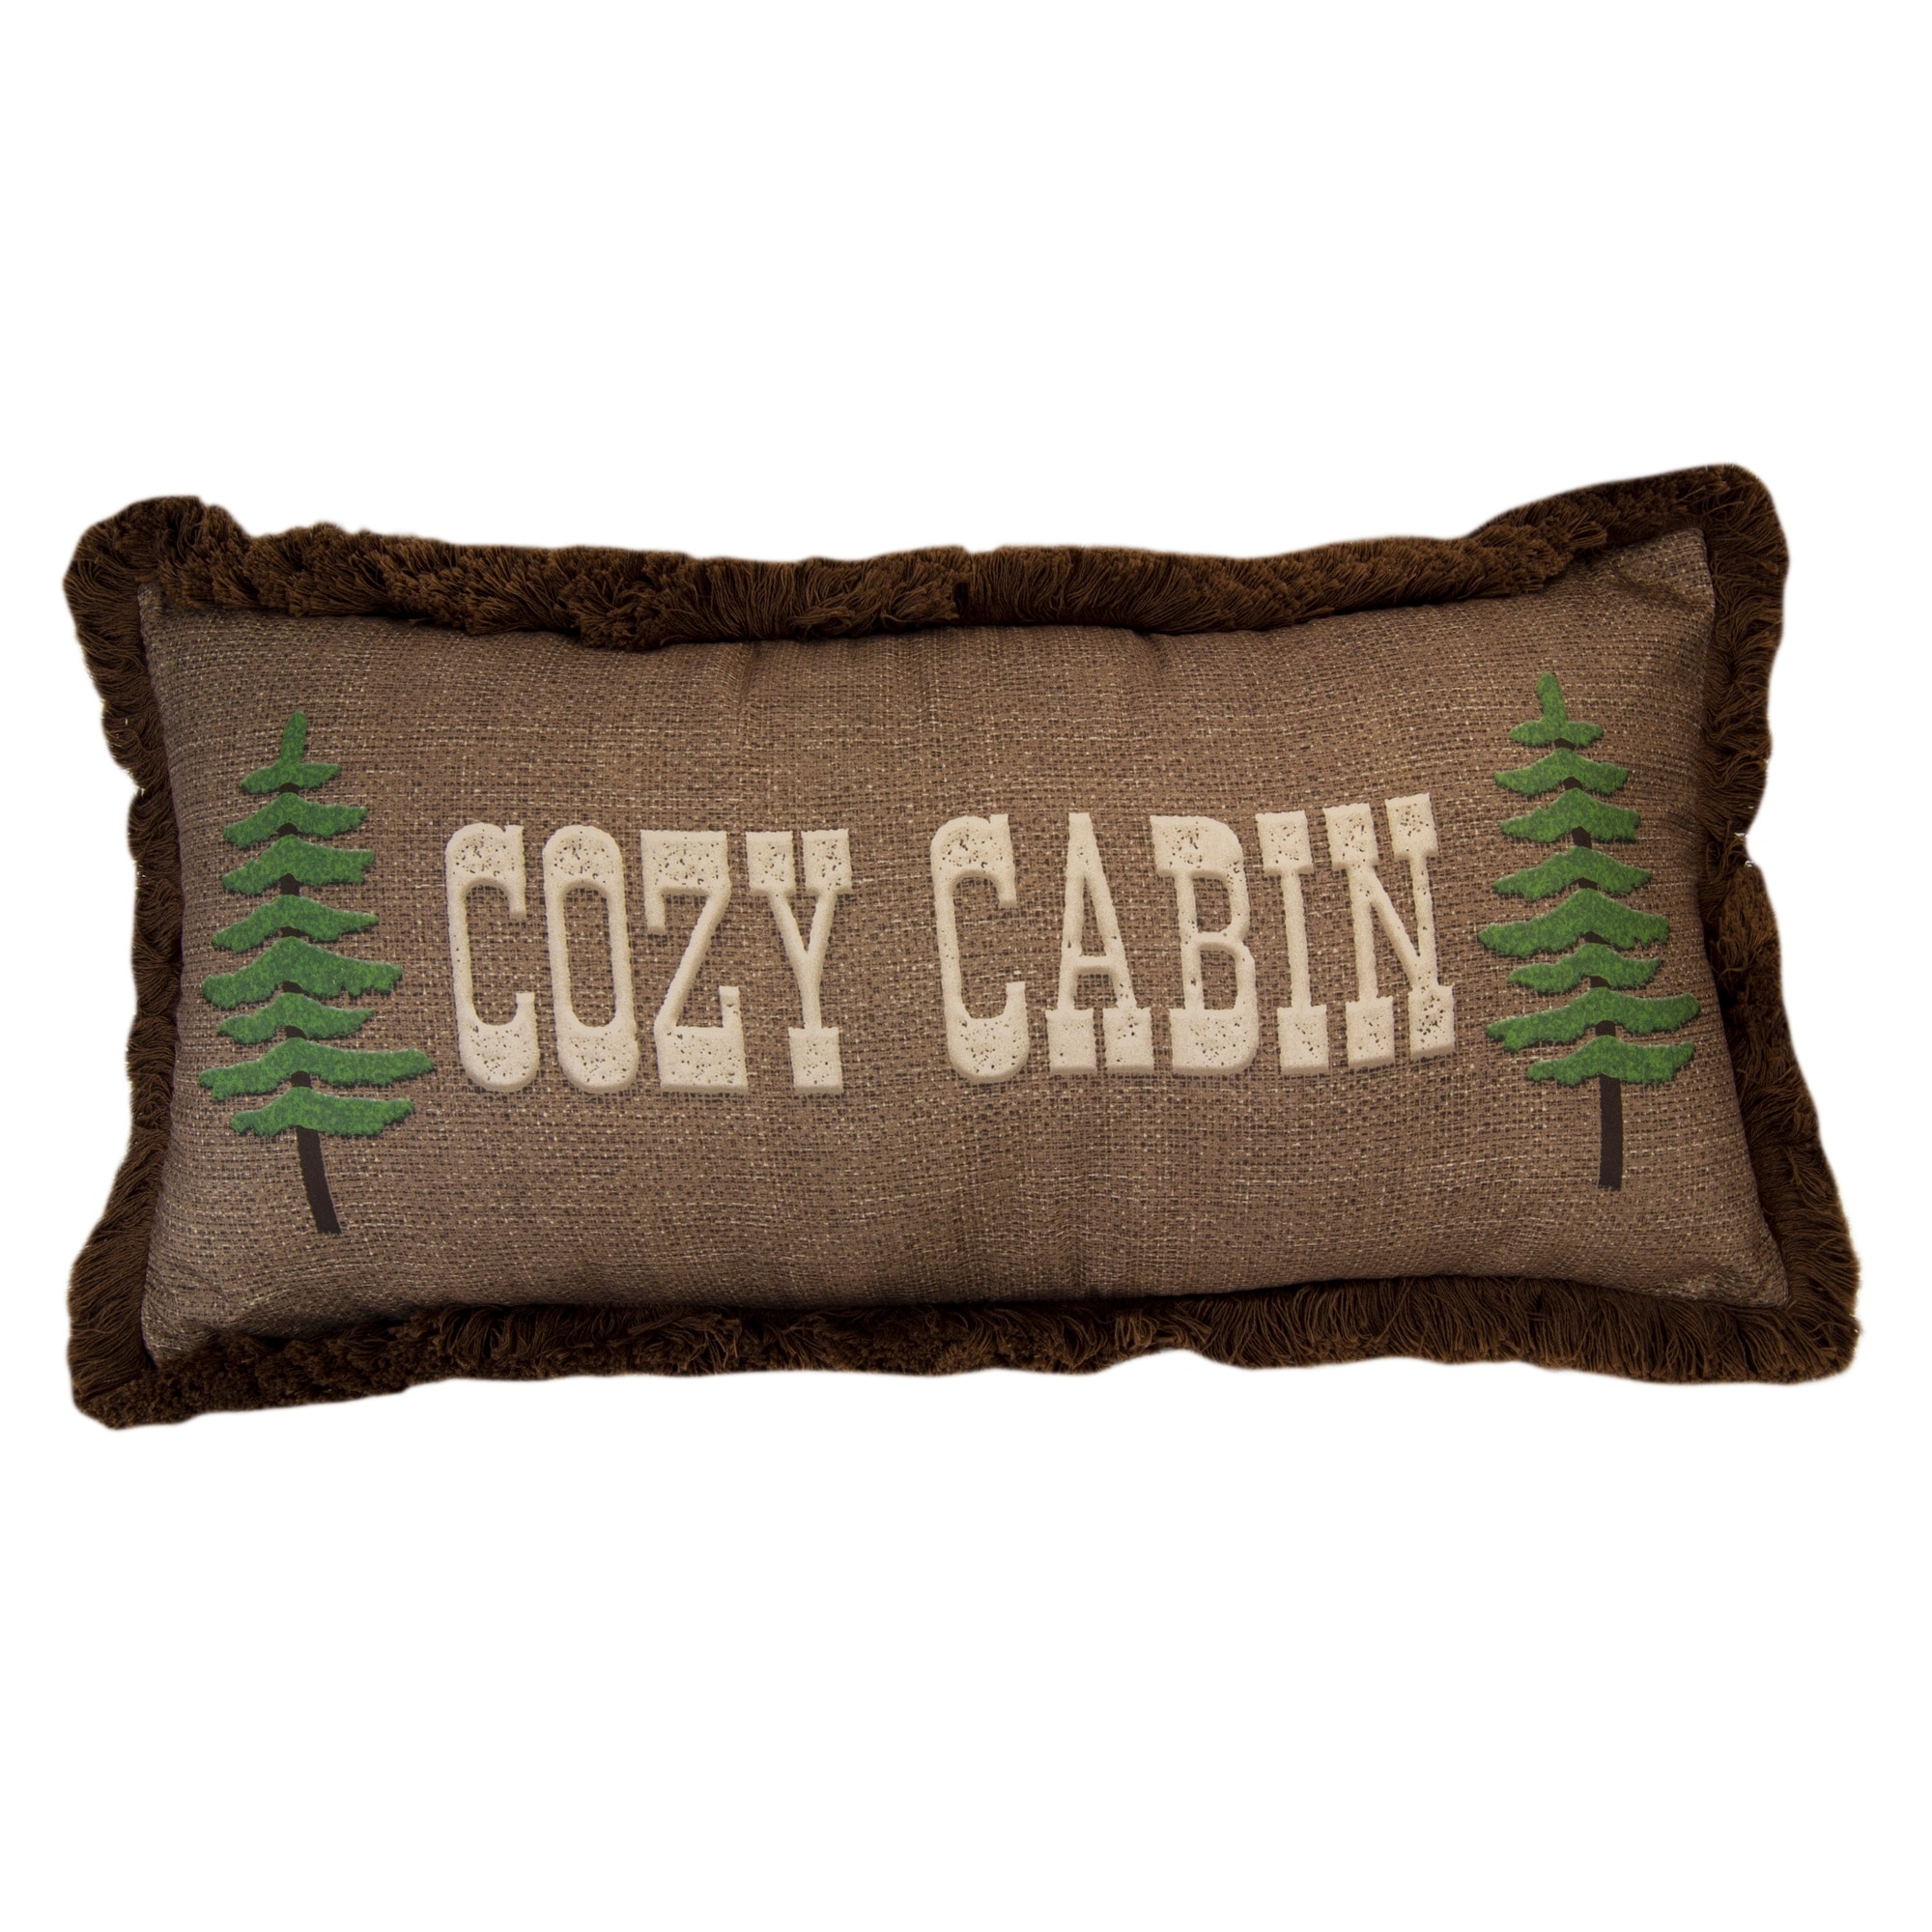 https://ak1.ostkcdn.com/images/products/is/images/direct/f85d027568a9d9084734a21e0fc9f8484039204b/Your-Lifestyle-Cozy-Cabin-Decorative-Pillow.jpg